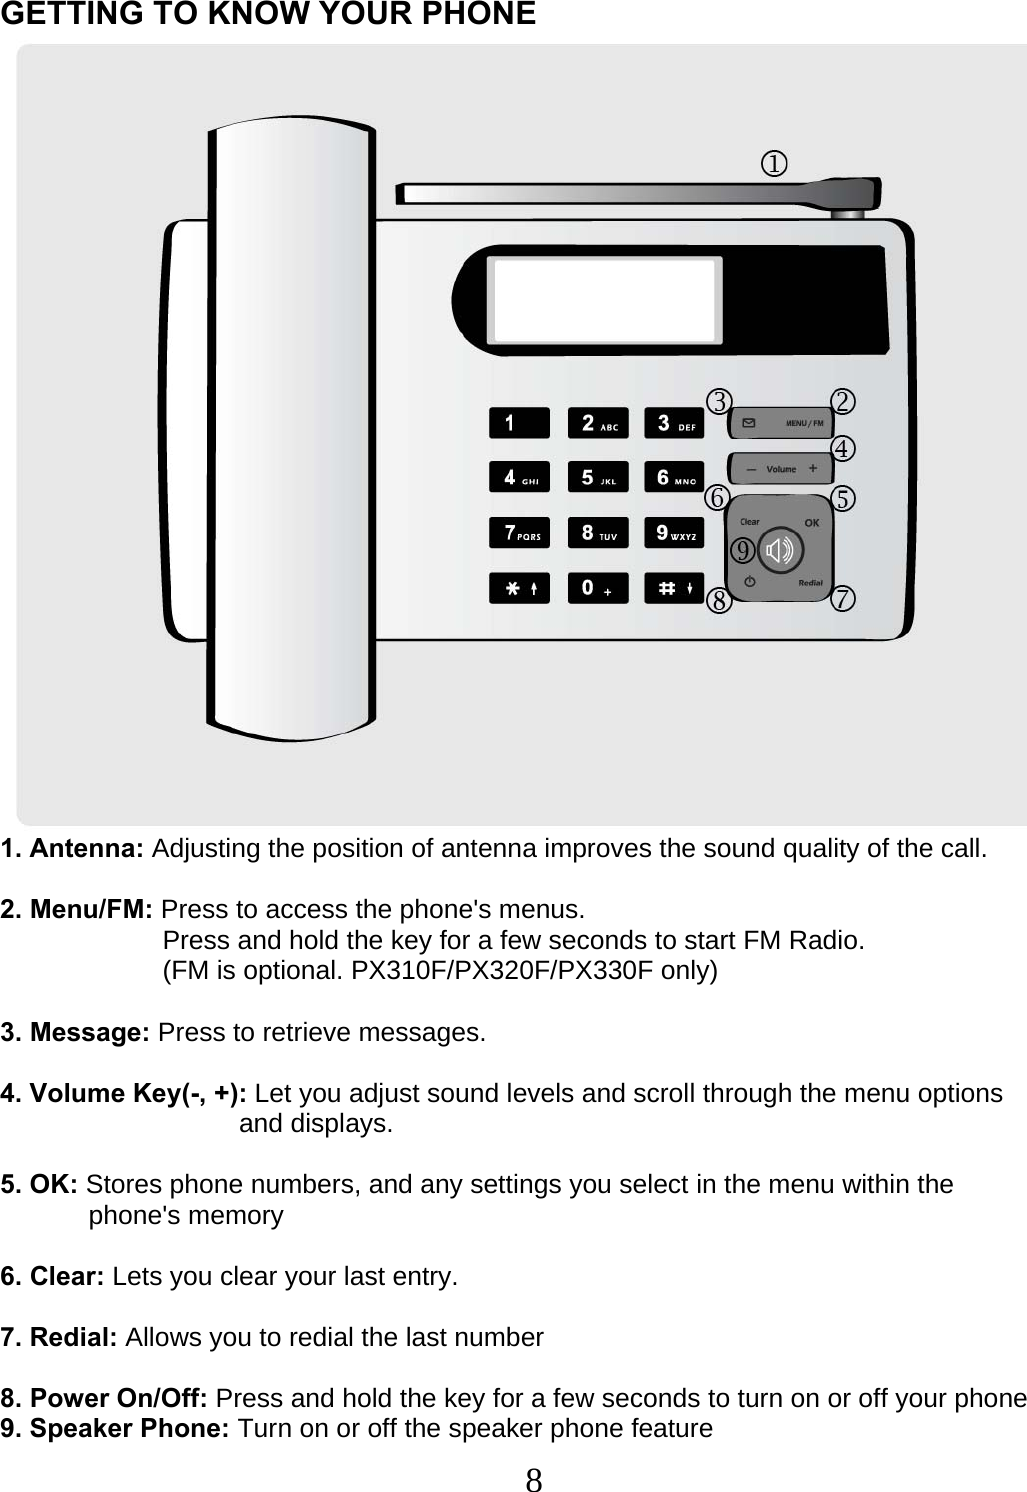  8  GETTING TO KNOW YOUR PHONE  1. Antenna: Adjusting the position of antenna improves the sound quality of the call.  2. Menu/FM: Press to access the phone&apos;s menus.                       Press and hold the key for a few seconds to start FM Radio.                       (FM is optional. PX310F/PX320F/PX330F only)                        3. Message: Press to retrieve messages.  4. Volume Key(-, +): Let you adjust sound levels and scroll through the menu options  and displays.  5. OK: Stores phone numbers, and any settings you select in the menu within the             phone&apos;s memory  6. Clear: Lets you clear your last entry.   7. Redial: Allows you to redial the last number  8. Power On/Off: Press and hold the key for a few seconds to turn on or off your phone 9. Speaker Phone: Turn on or off the speaker phone feature 